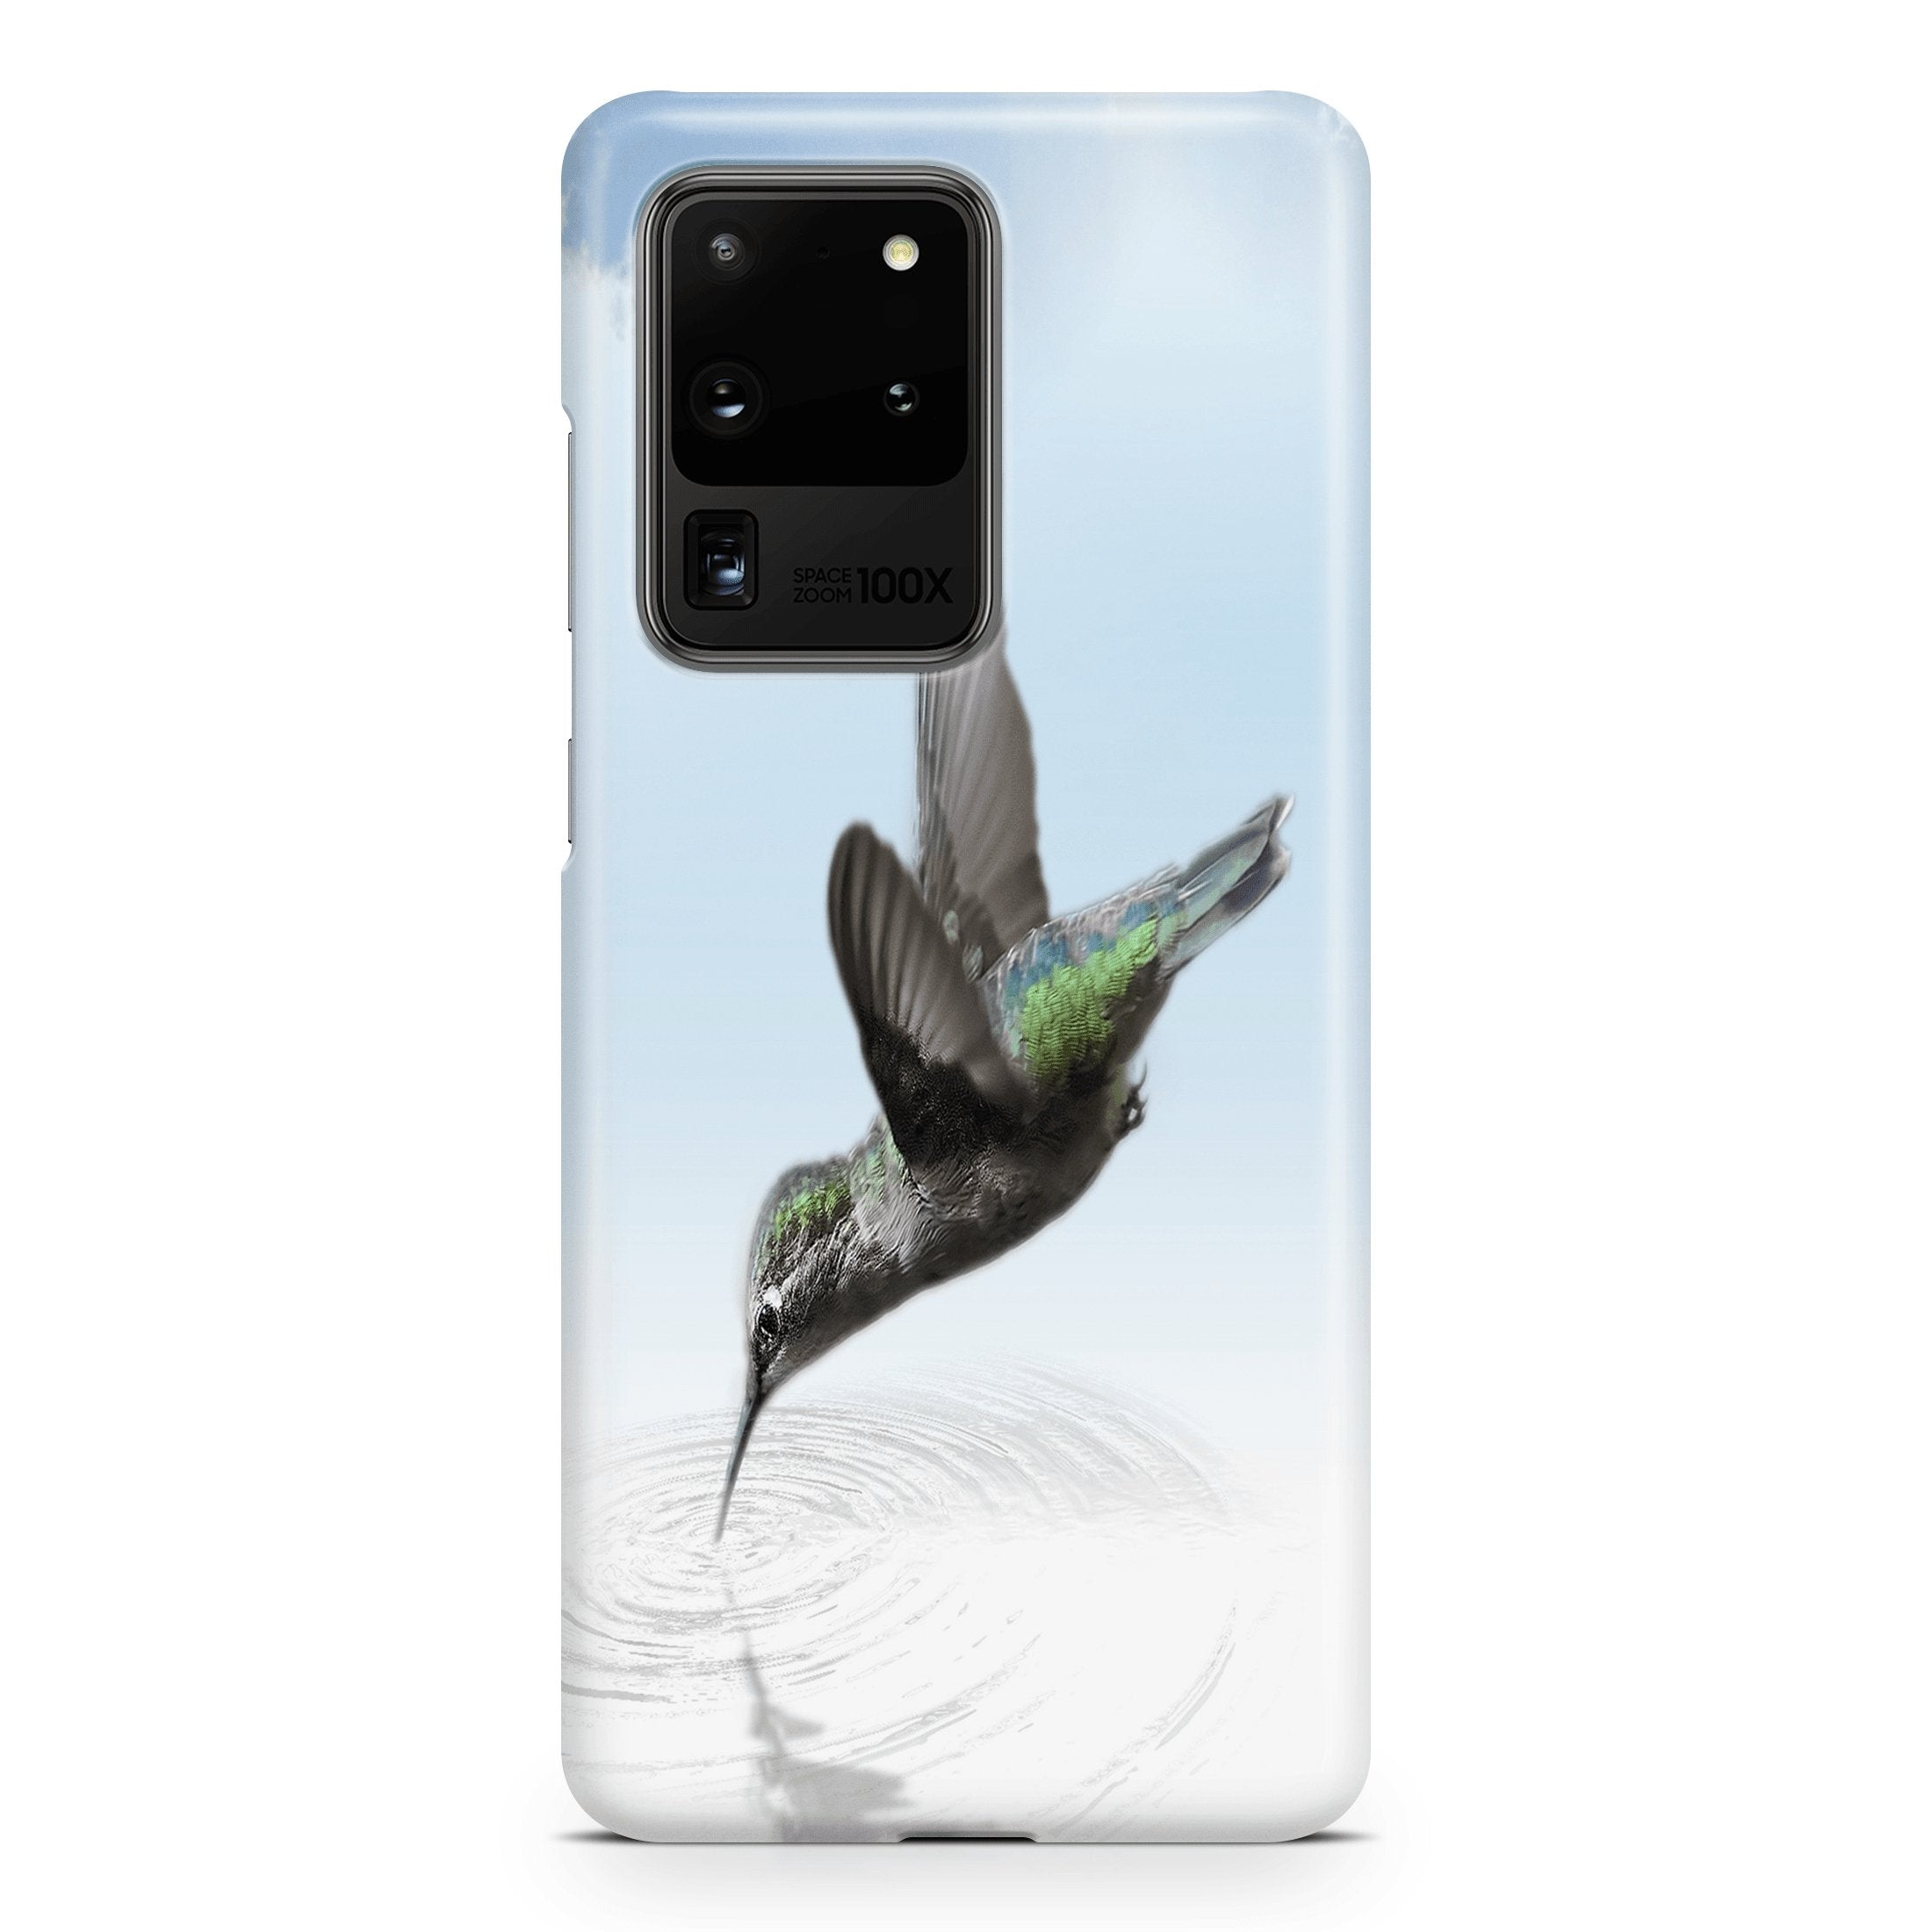 Simple Hummingbird - Samsung phone case designs by CaseSwagger